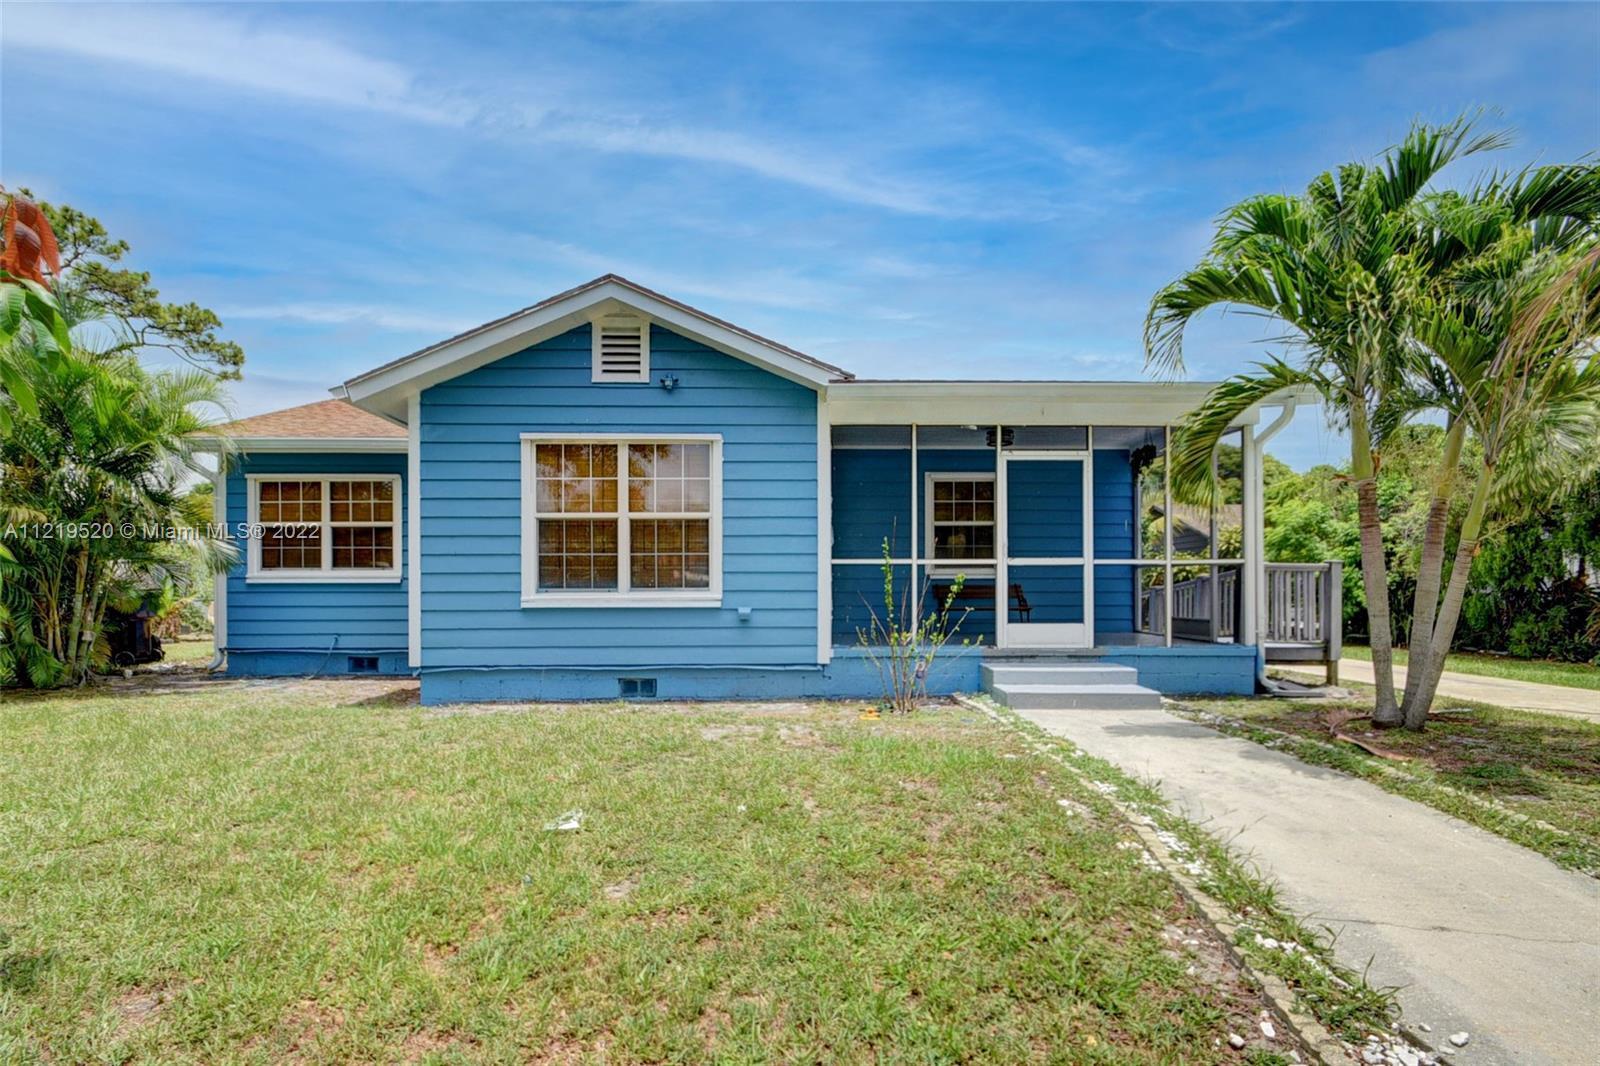 MOVE IN READY! Situated on a tree lined street in the Vedado neighborhood, located just east of I-95